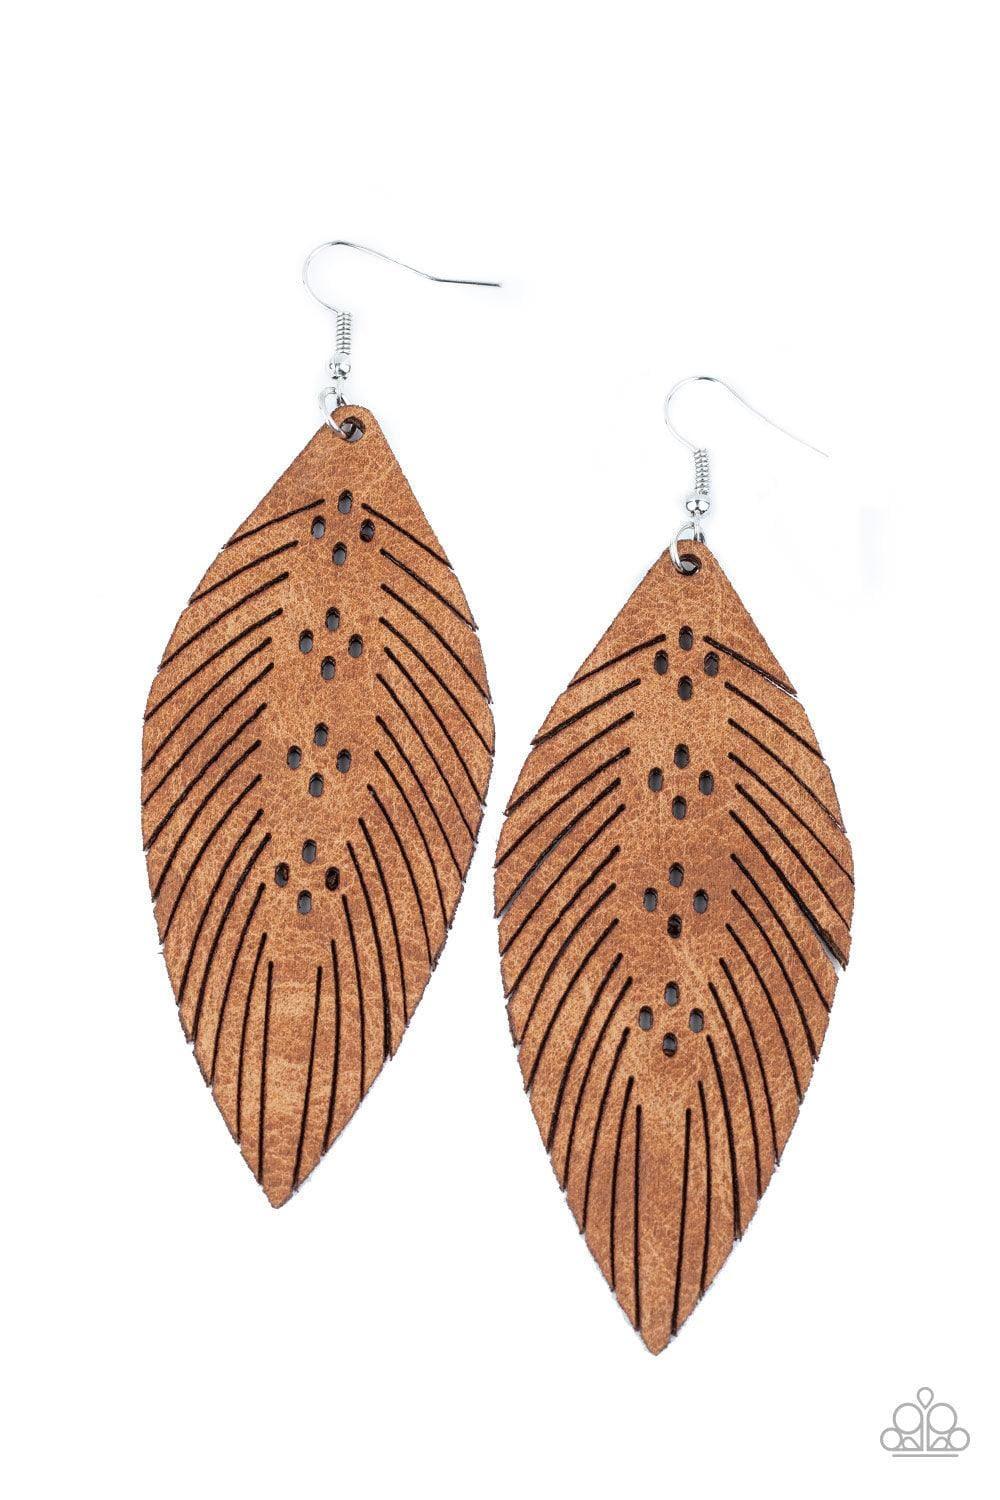 Paparazzi Accessories - Wherever The Wind Takes Me - Brown Earrings - Bling by JessieK